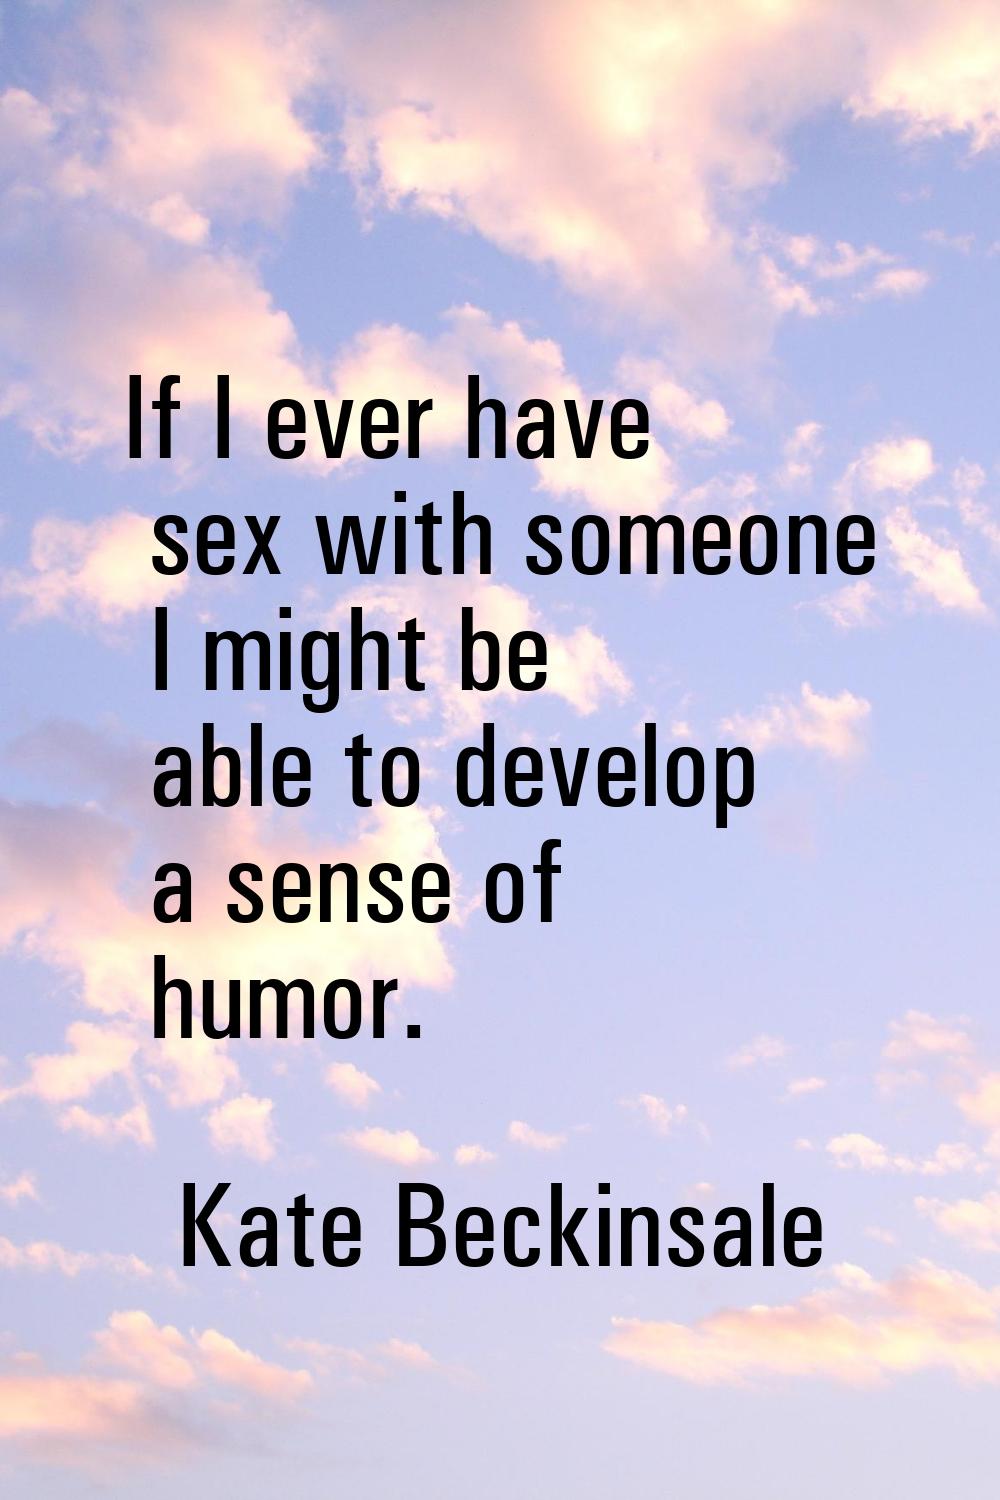 If I ever have sex with someone I might be able to develop a sense of humor.